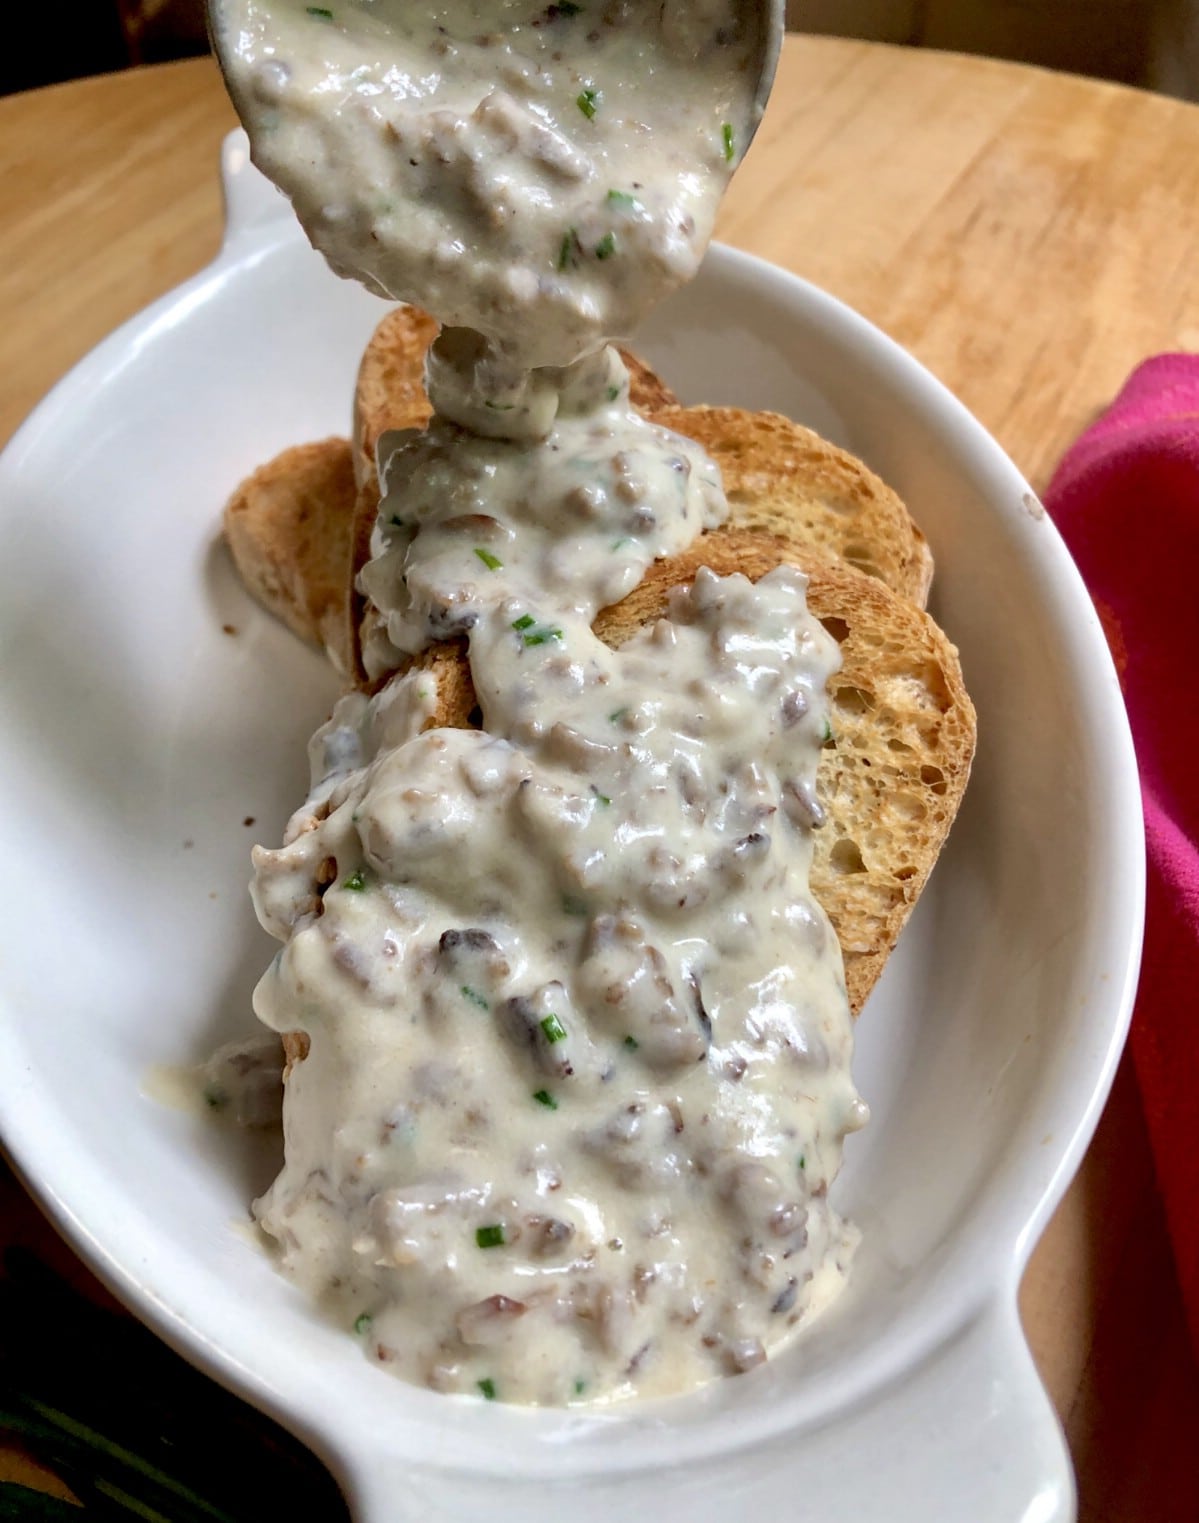 Pouring creamy chipped beef over toast